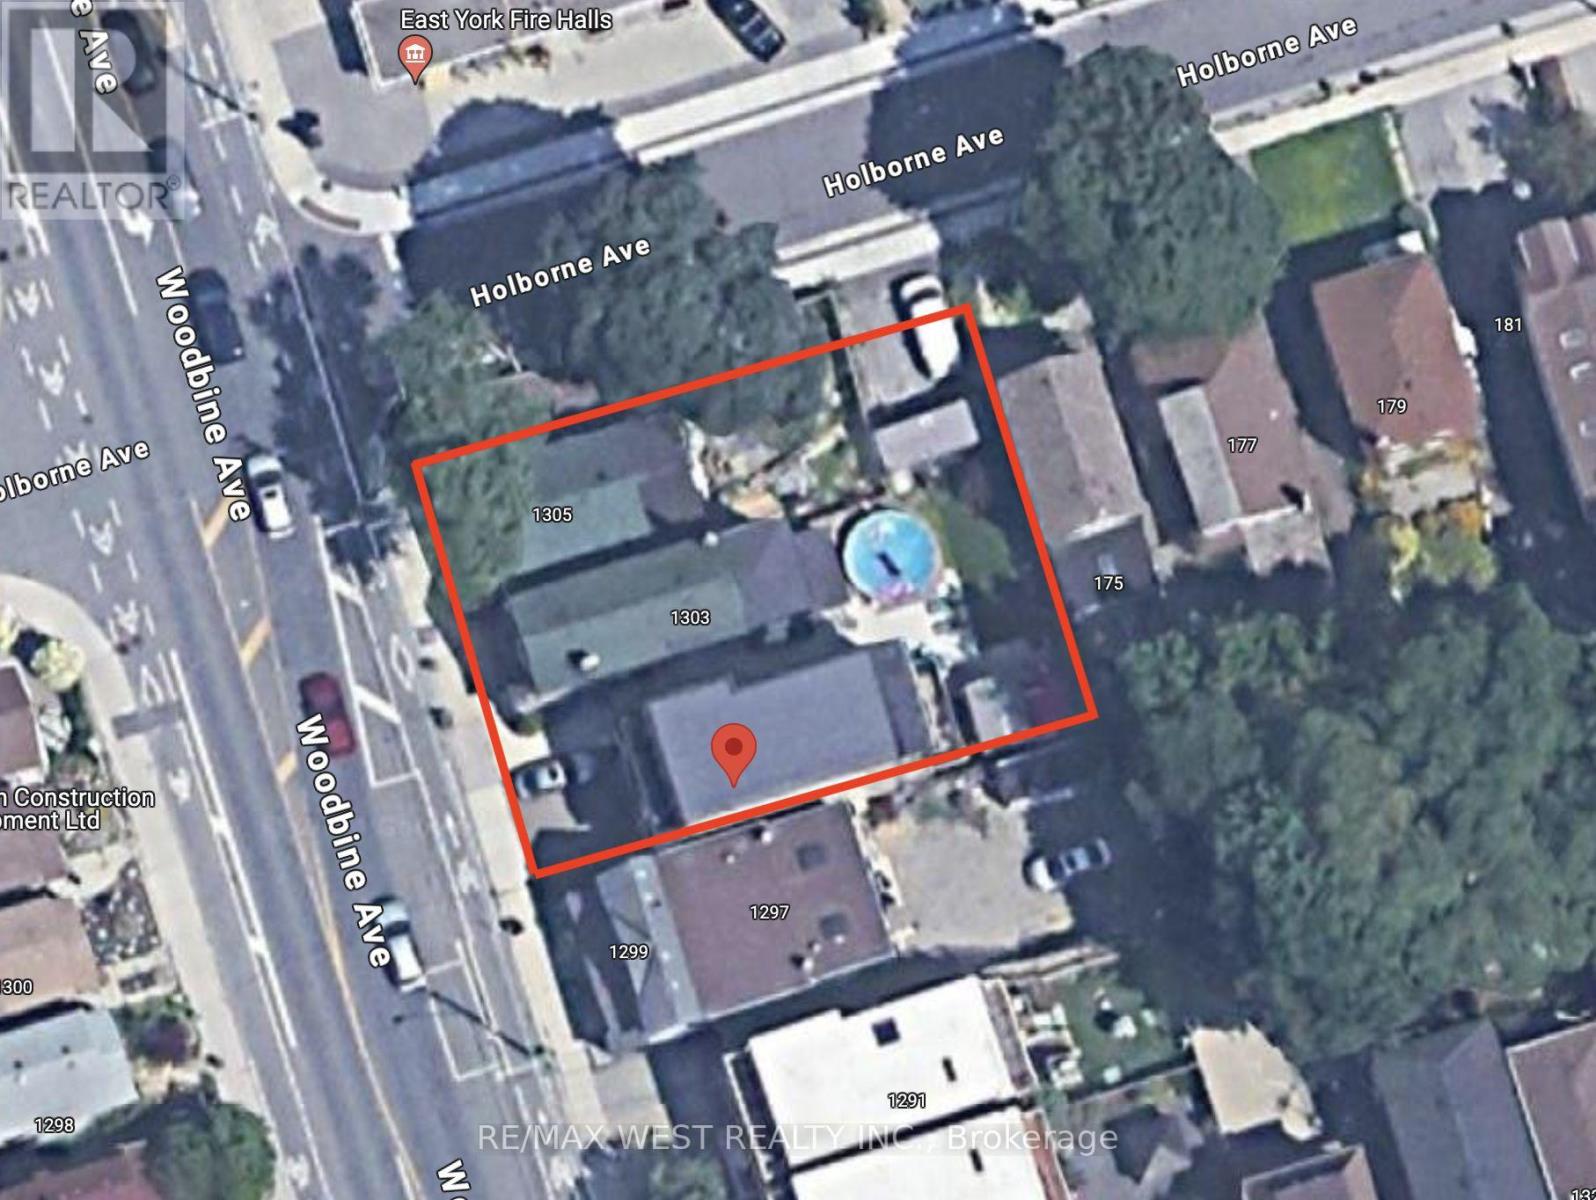 Vacant Land For Sale | 1301 1305 Woodbine Ave | Toronto | M4C4E8